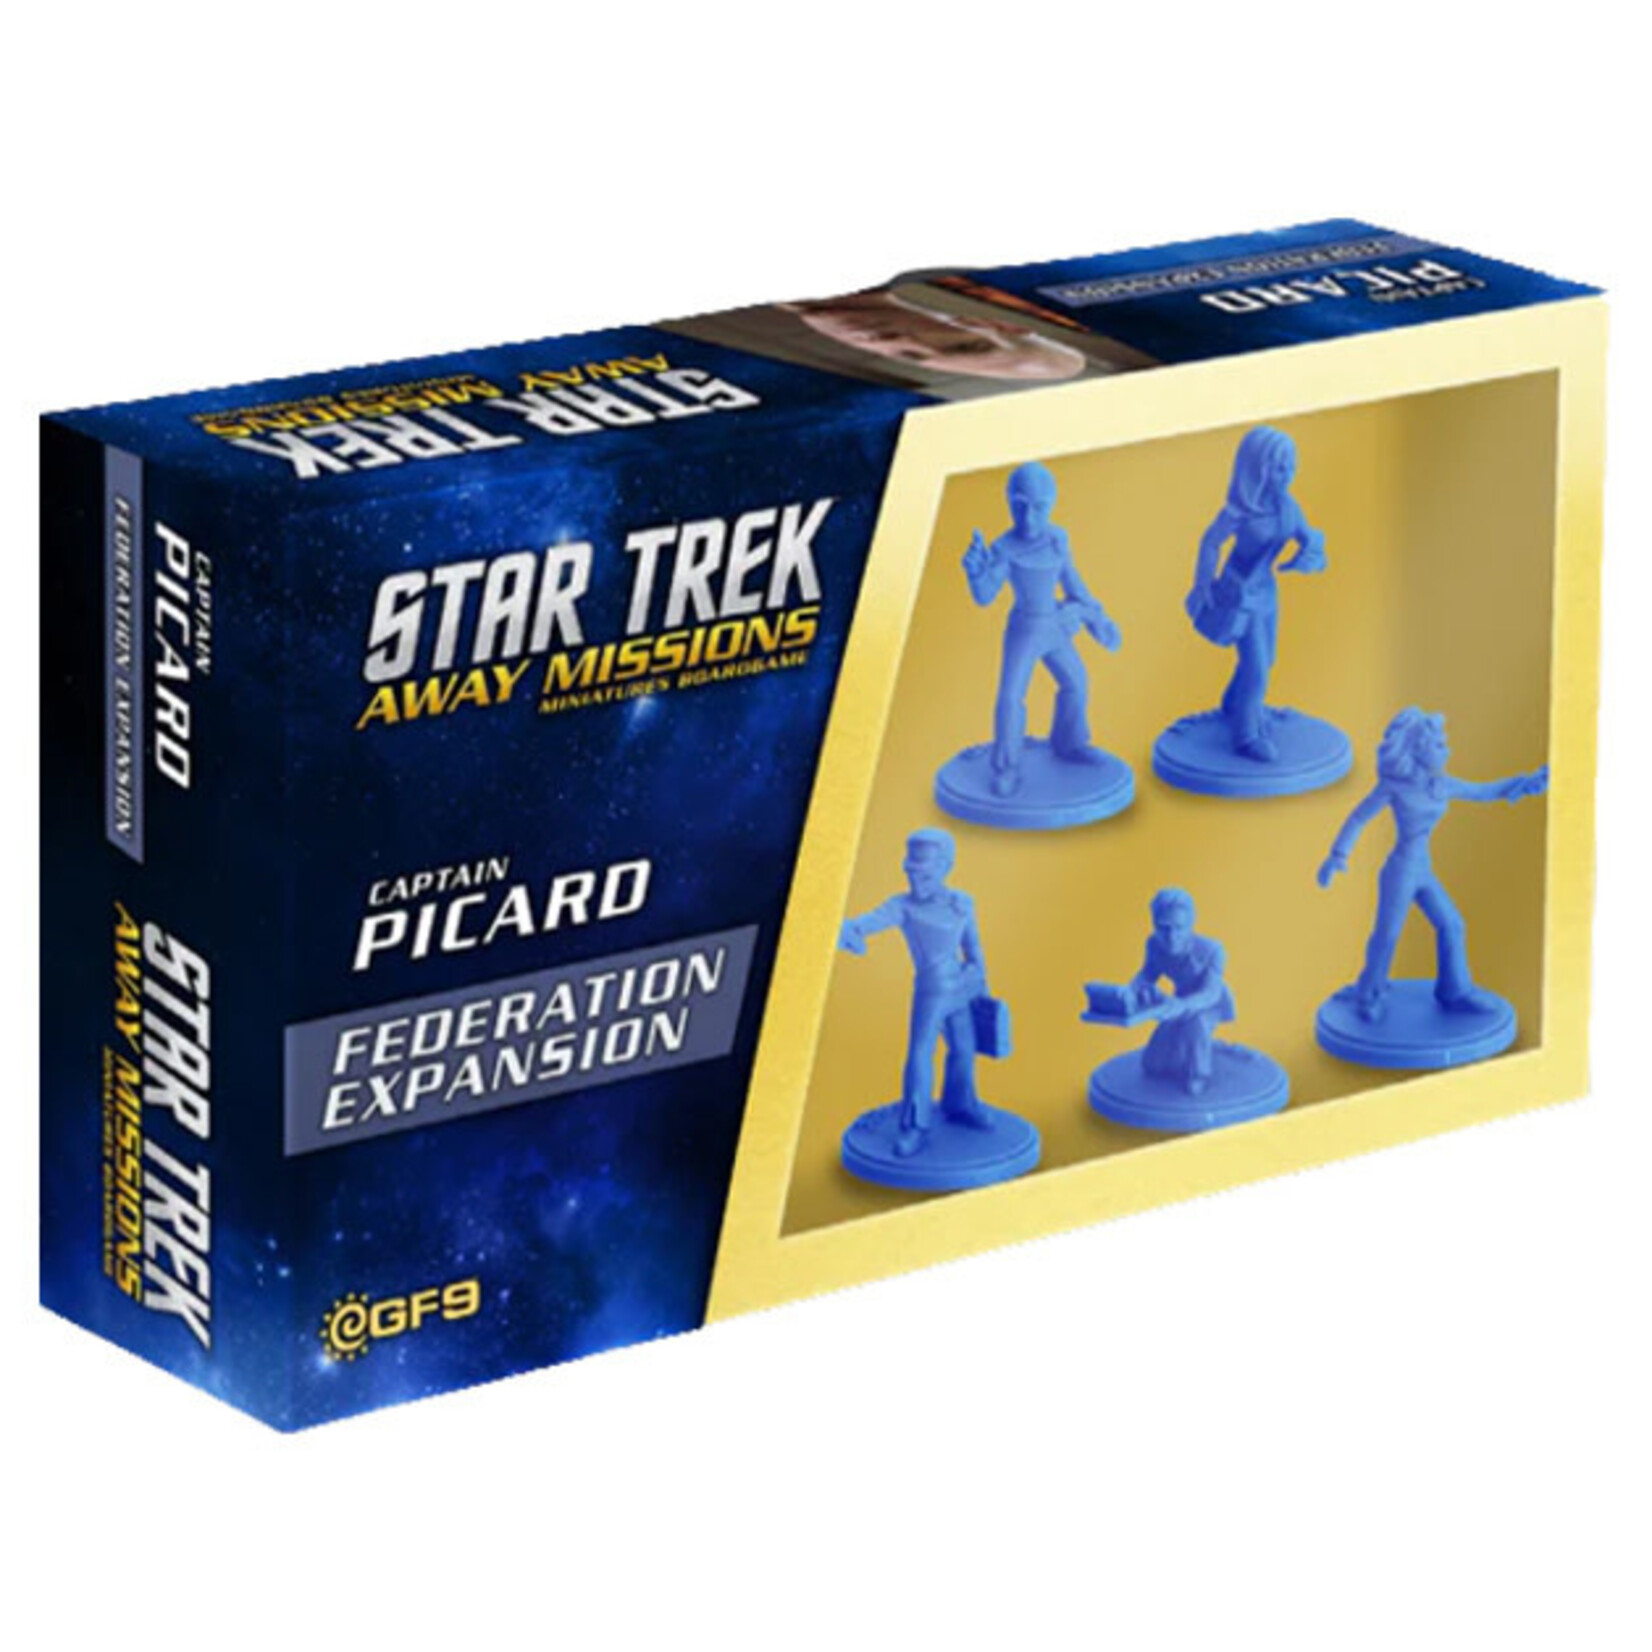 Gale Force 9 Star Trek: Away Missions: Captain Picard Expansion